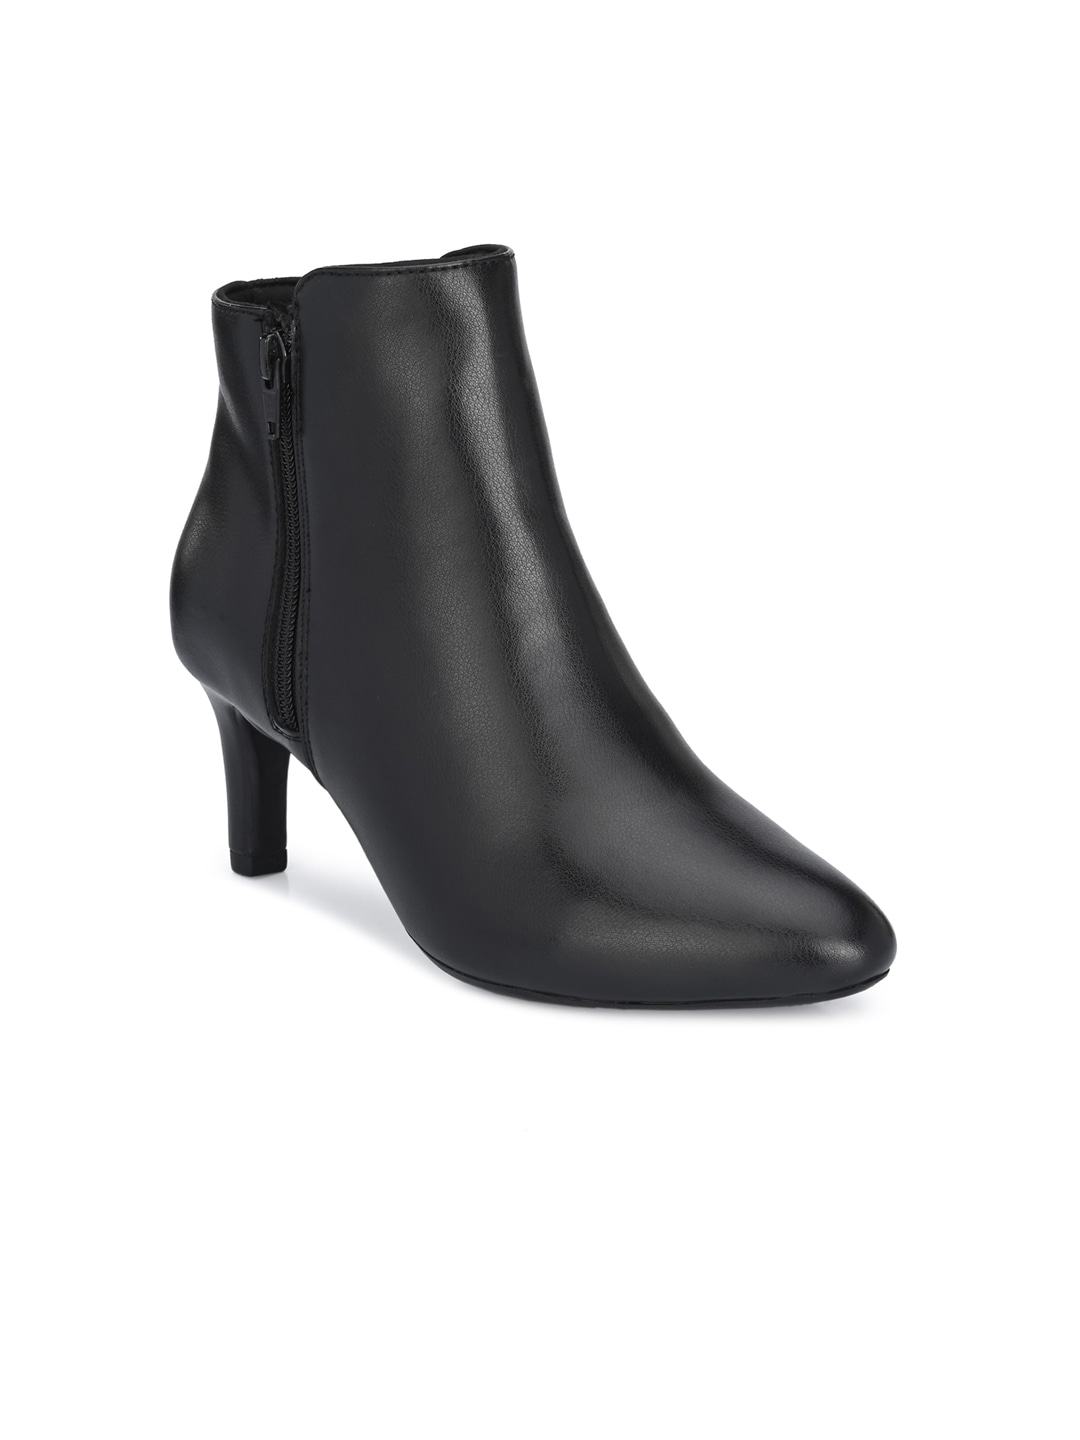 Delize Black Solid Heeled Boots Price in India